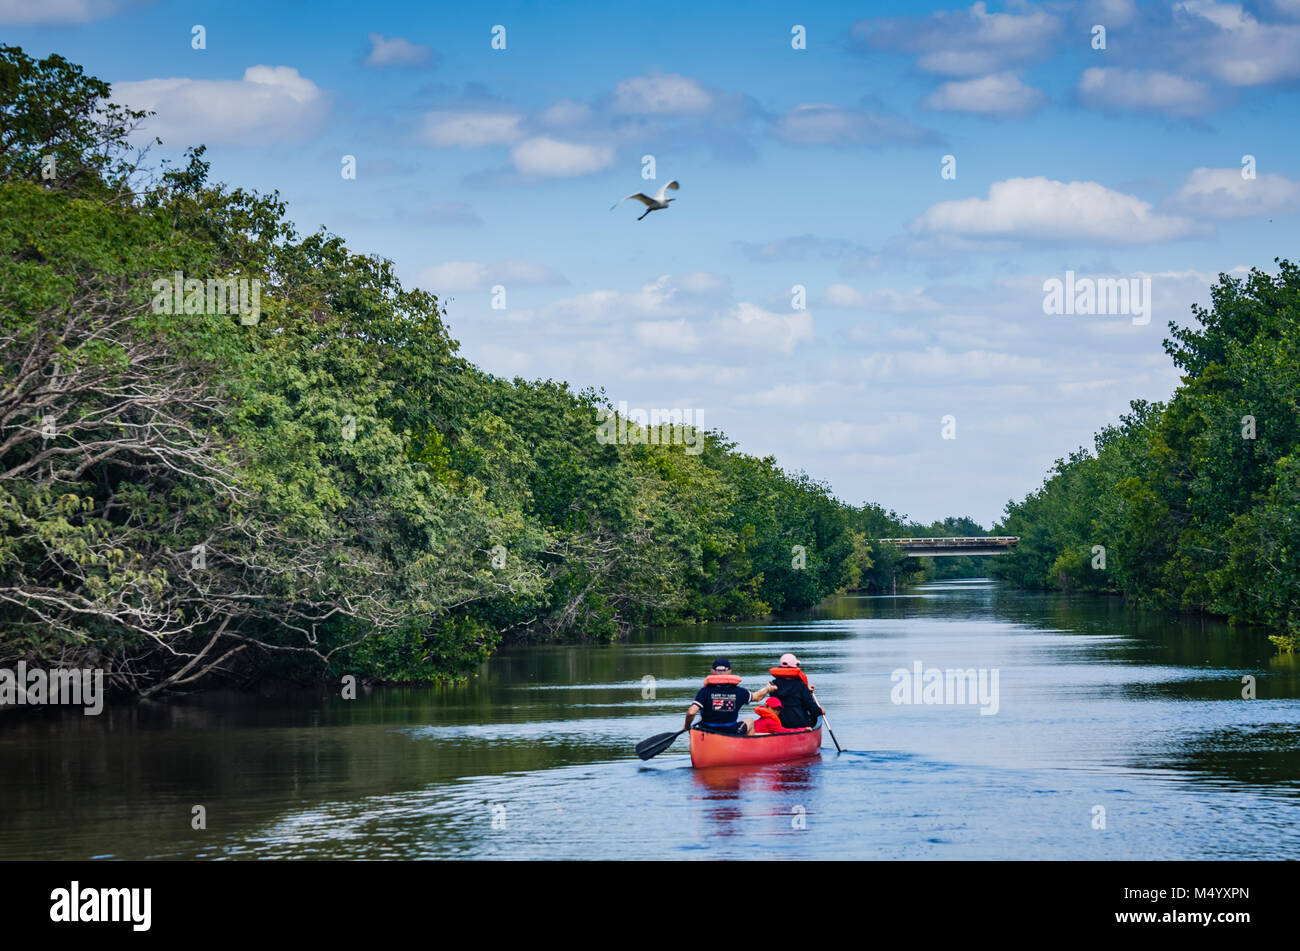 Family rows a red canoe on Biscayne Bay Lagoon at Biscayne National Park in Florida. Stock Photo